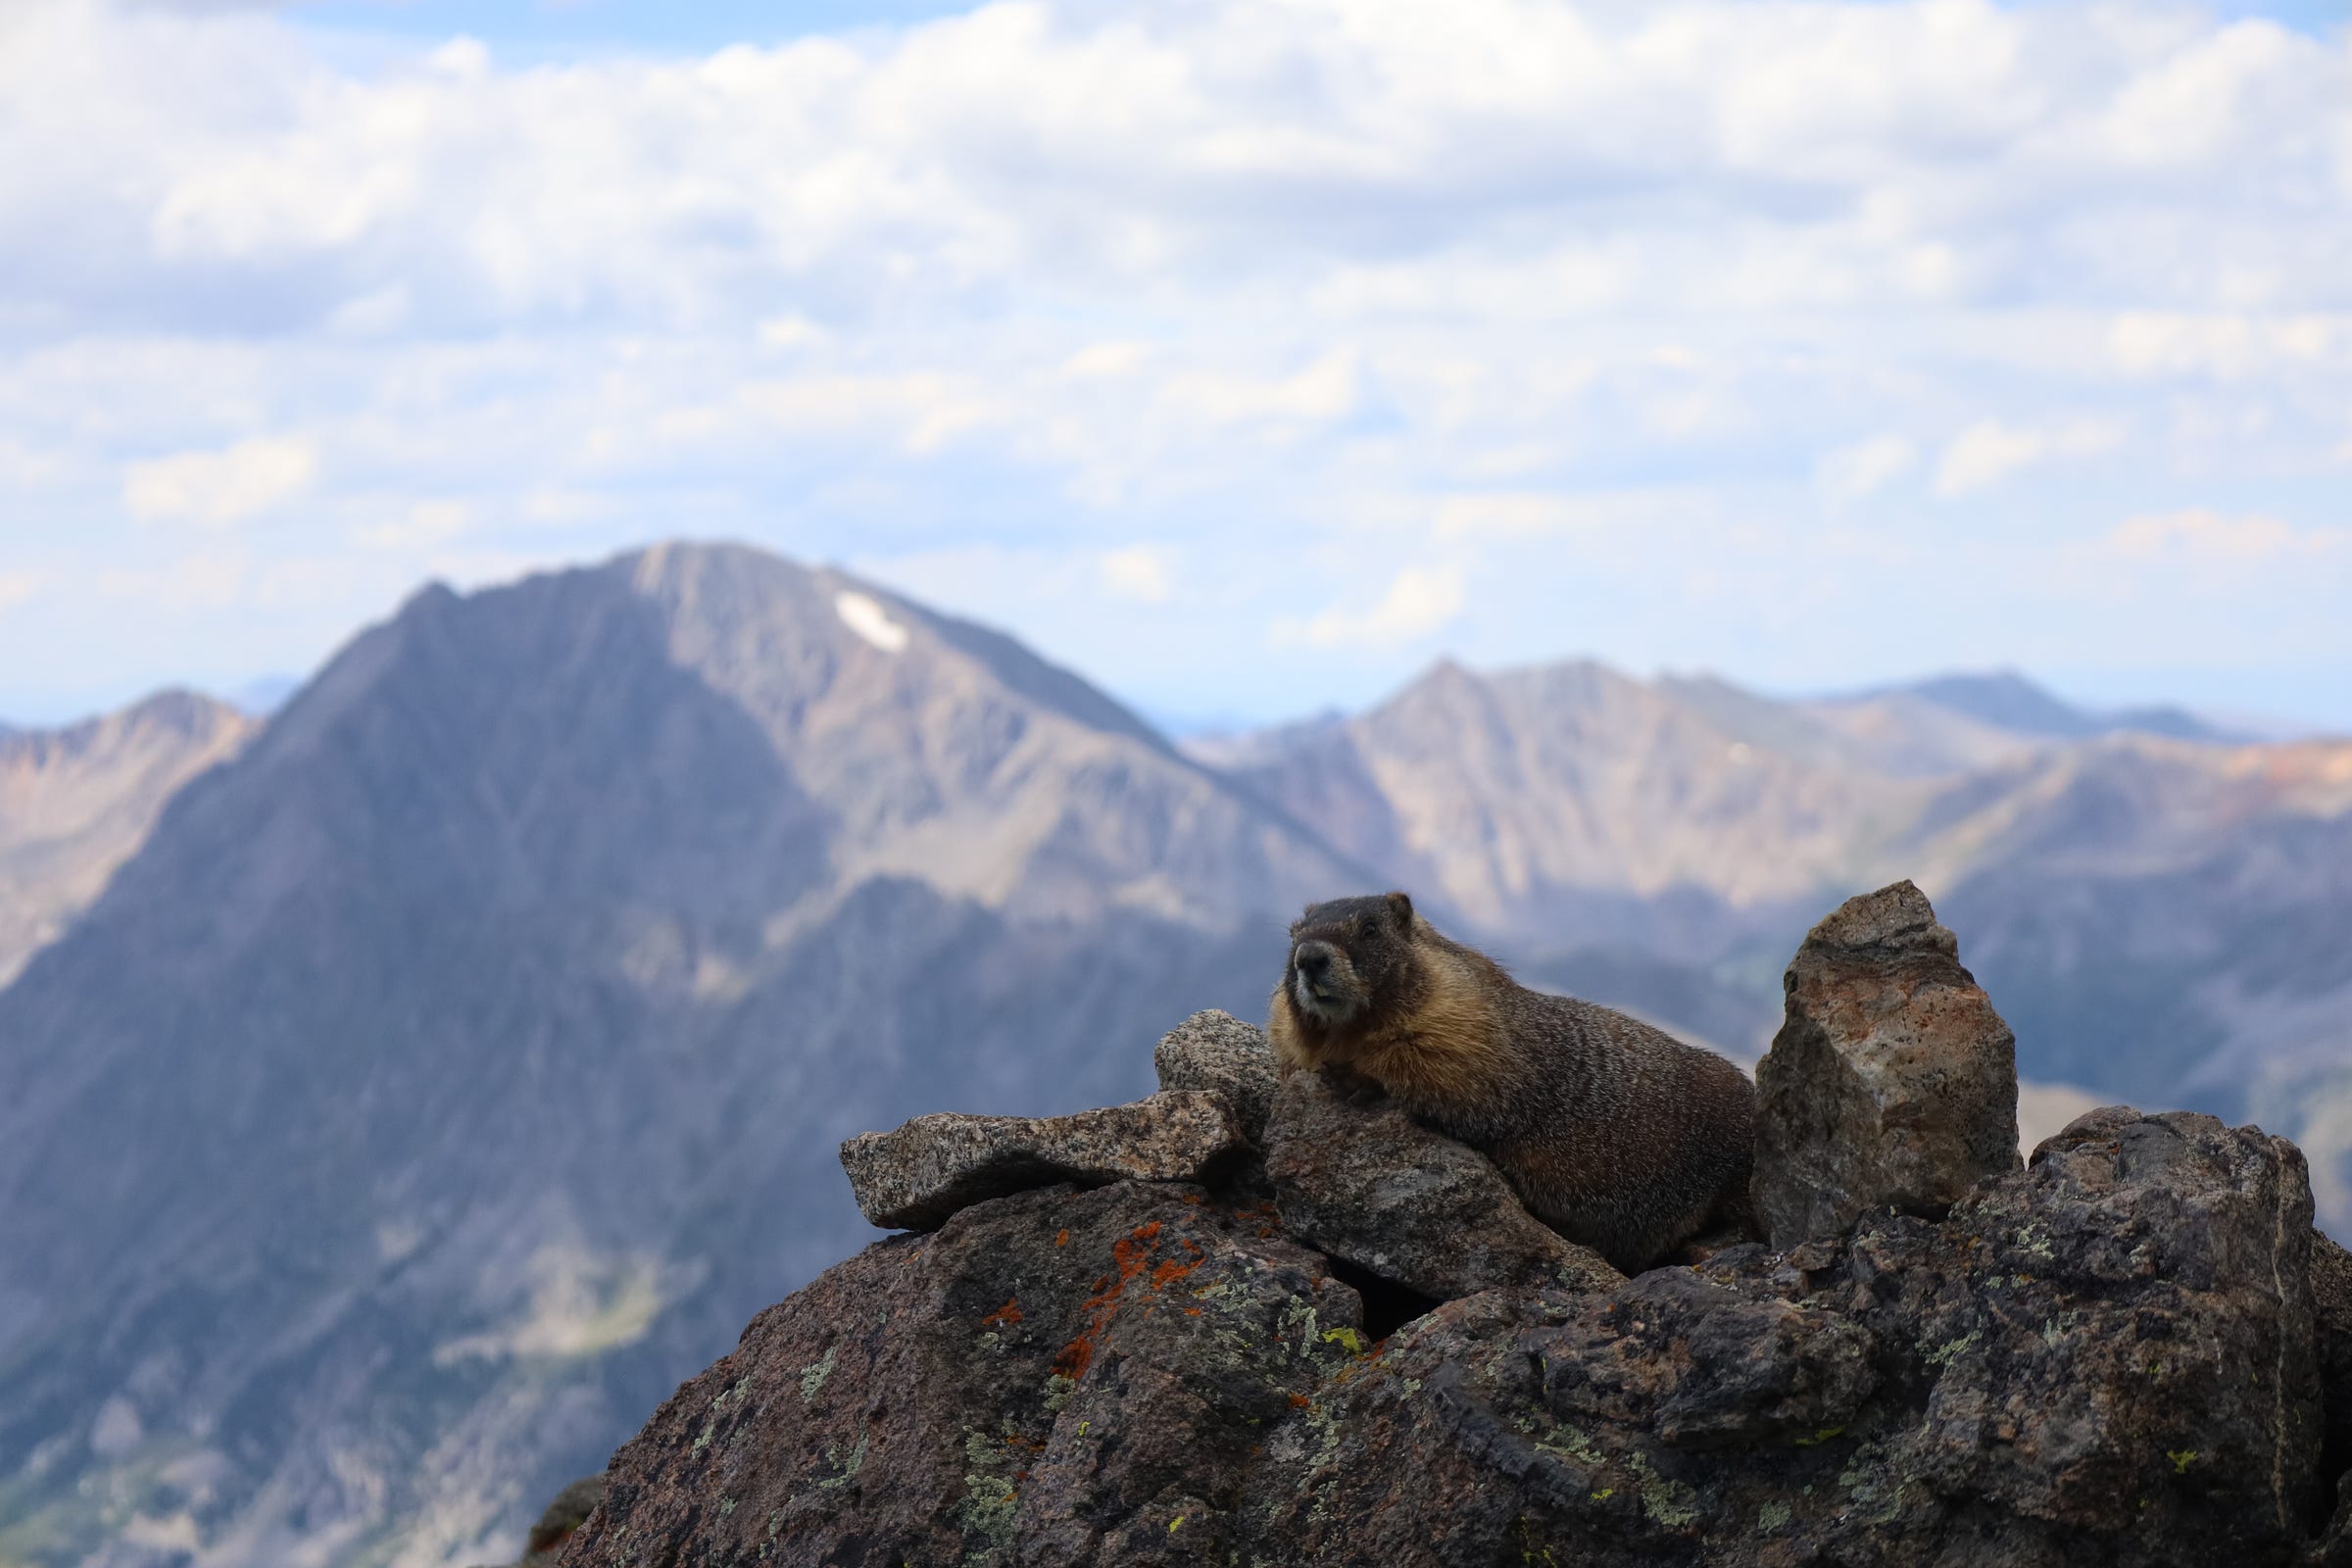 a marmot sits on a rock with mountains in the background